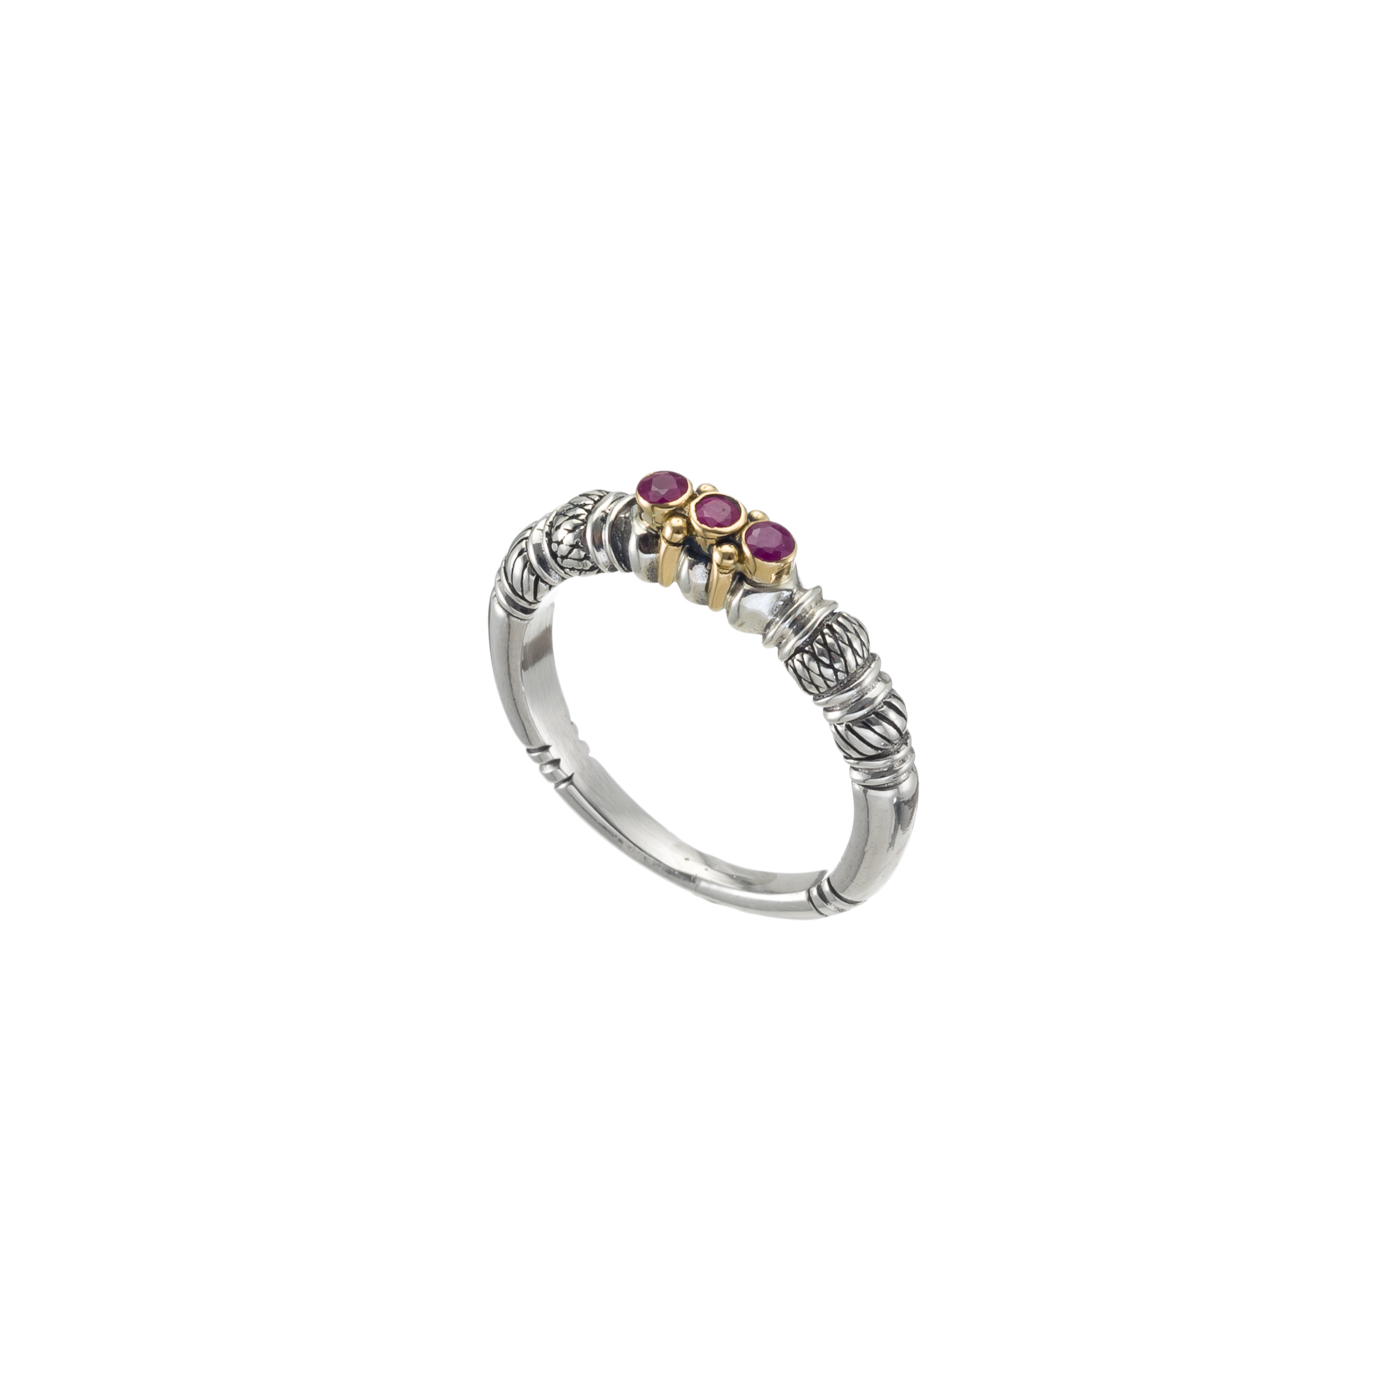 Kassandra Band ring in 18K Gold and Sterling Silver with rubies